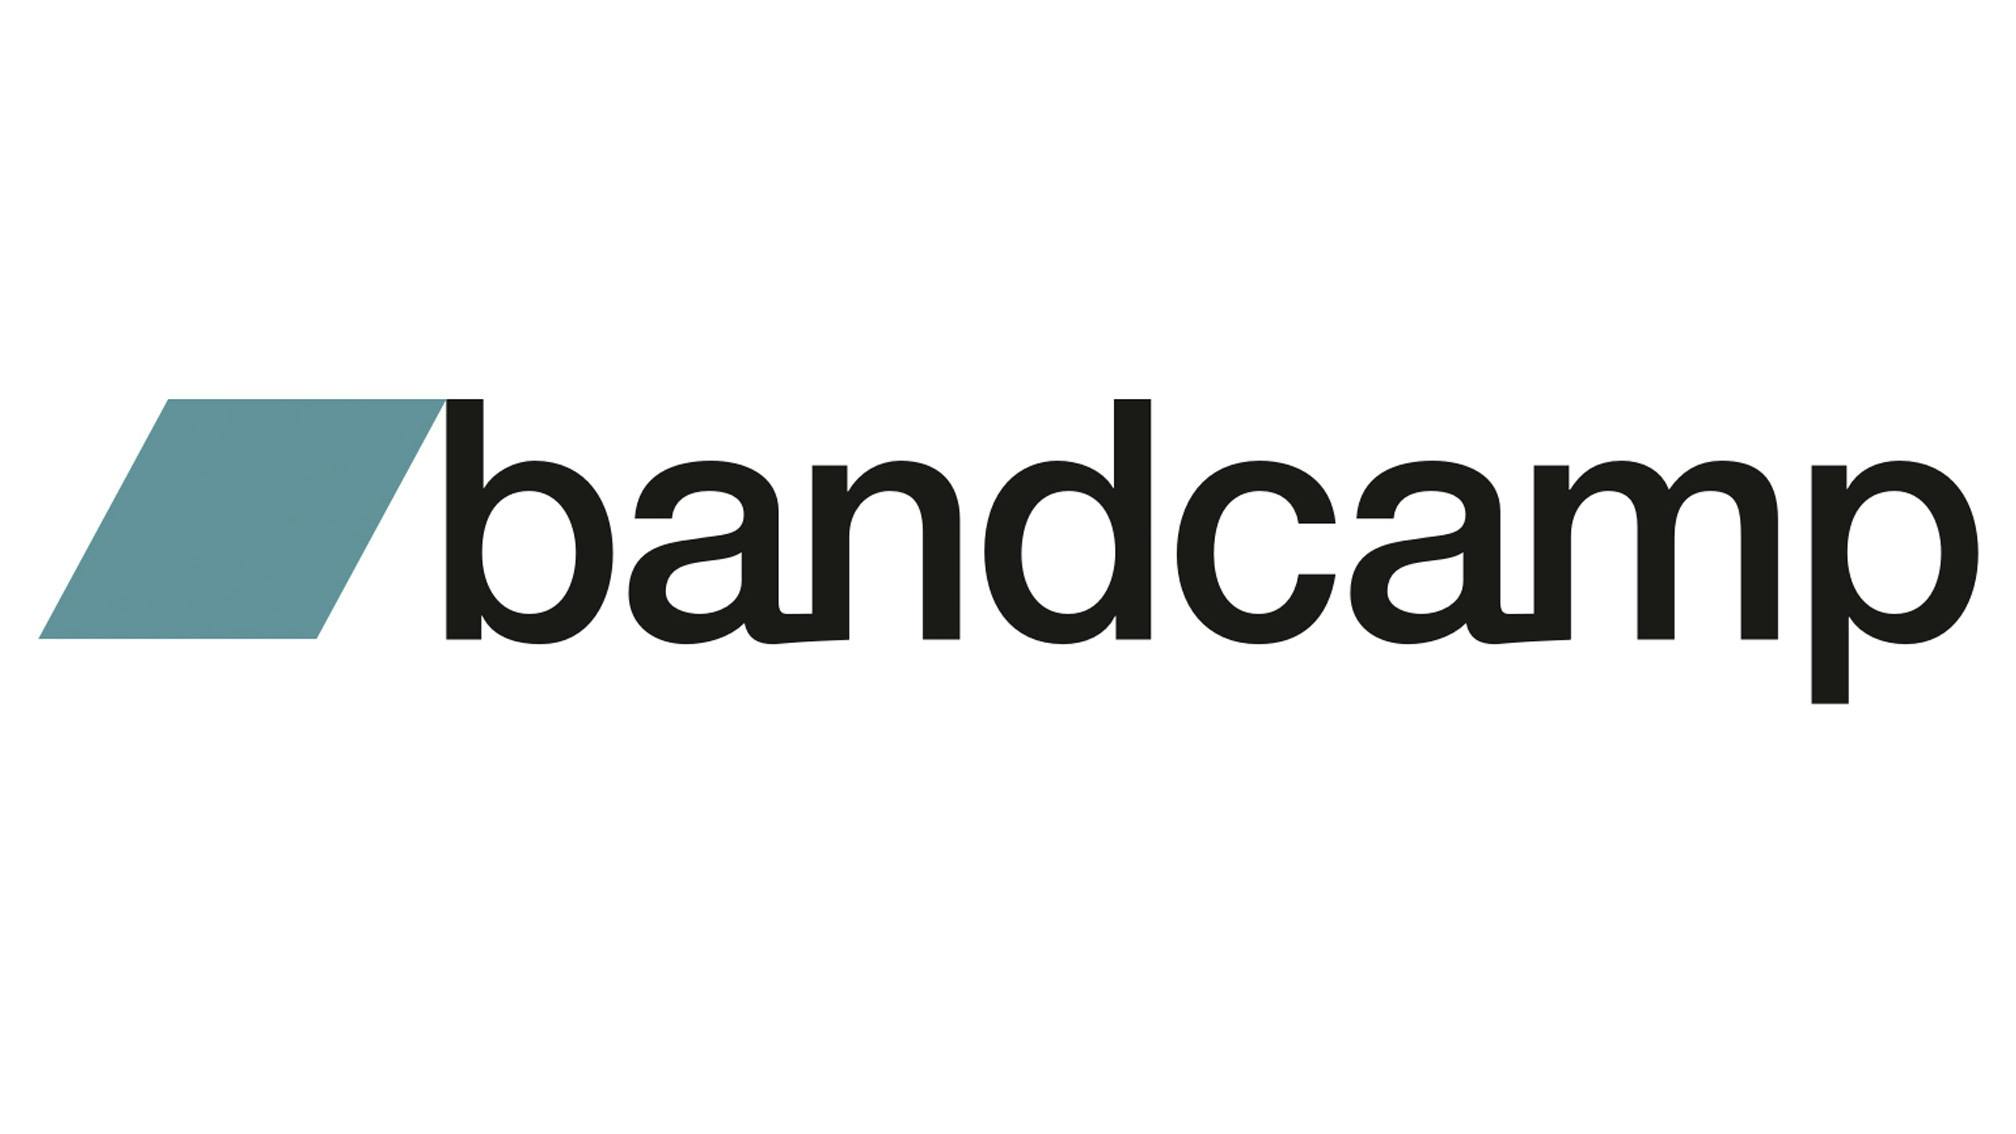 Bandcamp Fridays have raised $40 million for artists this year